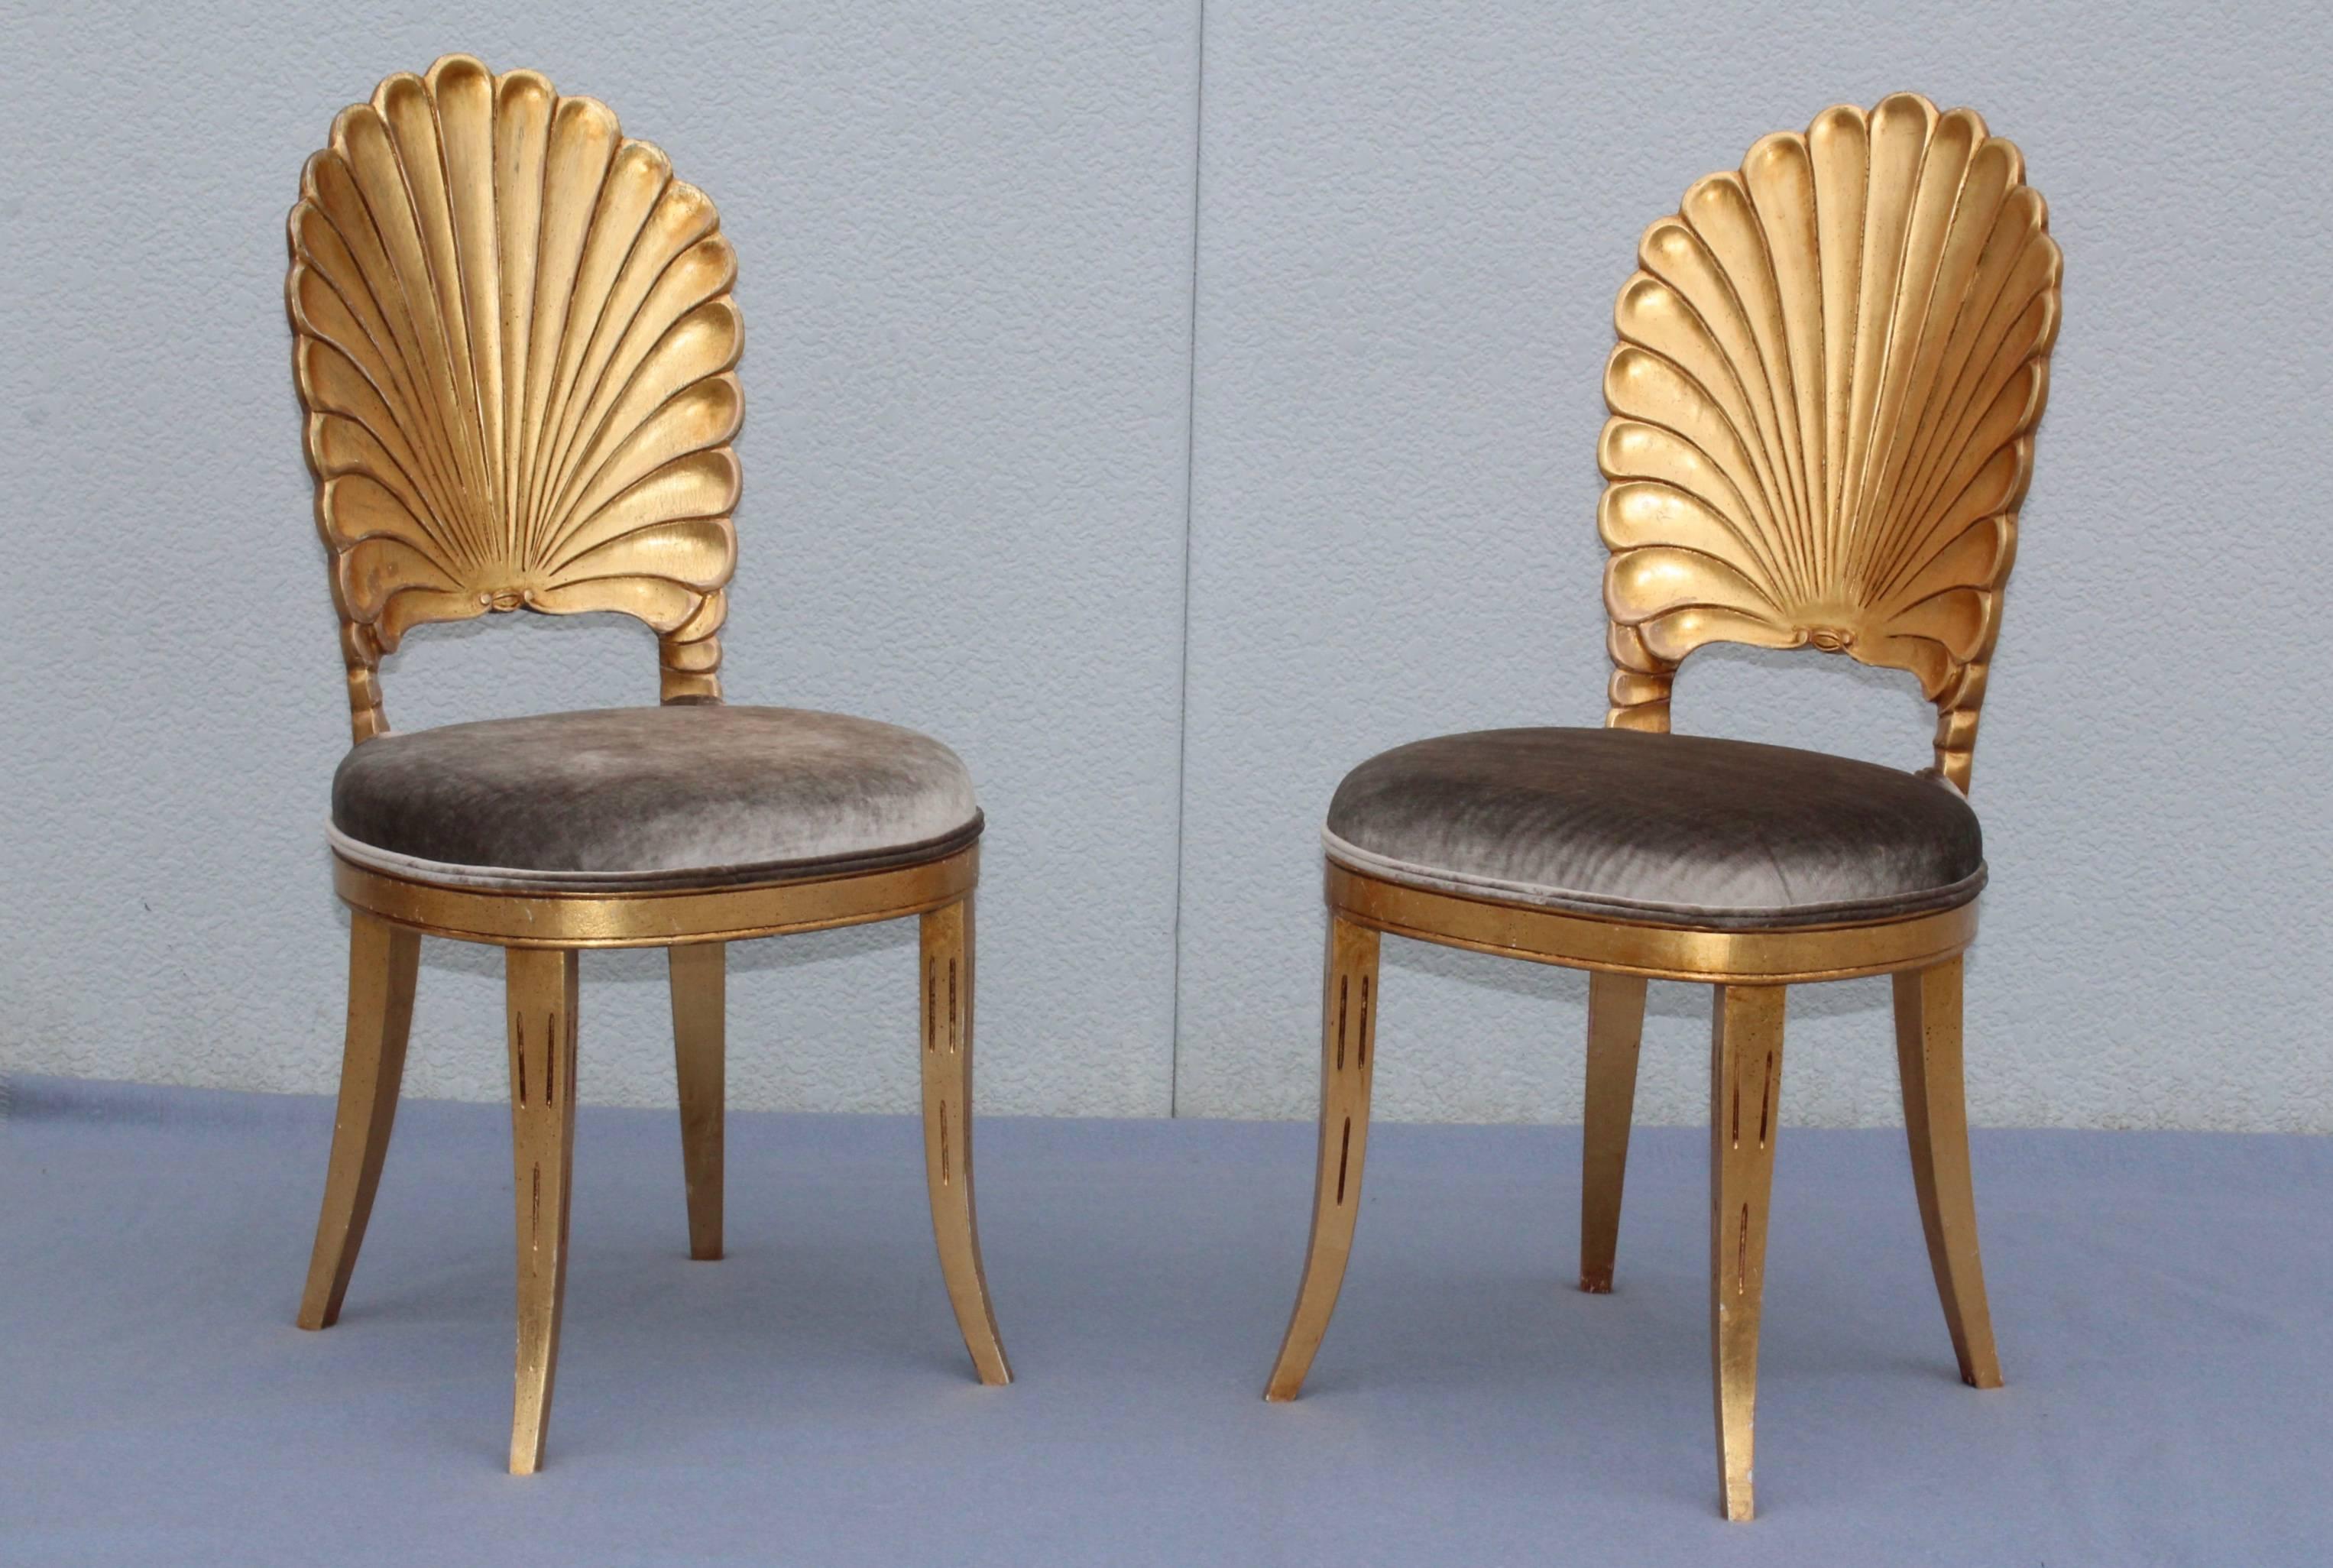 Stunning pair of 1950s Venetian Grotto carved shell back chairs, in vintage original condition with some wear and patina to the gold leaf finish. Newly upholstered in gray velvet.